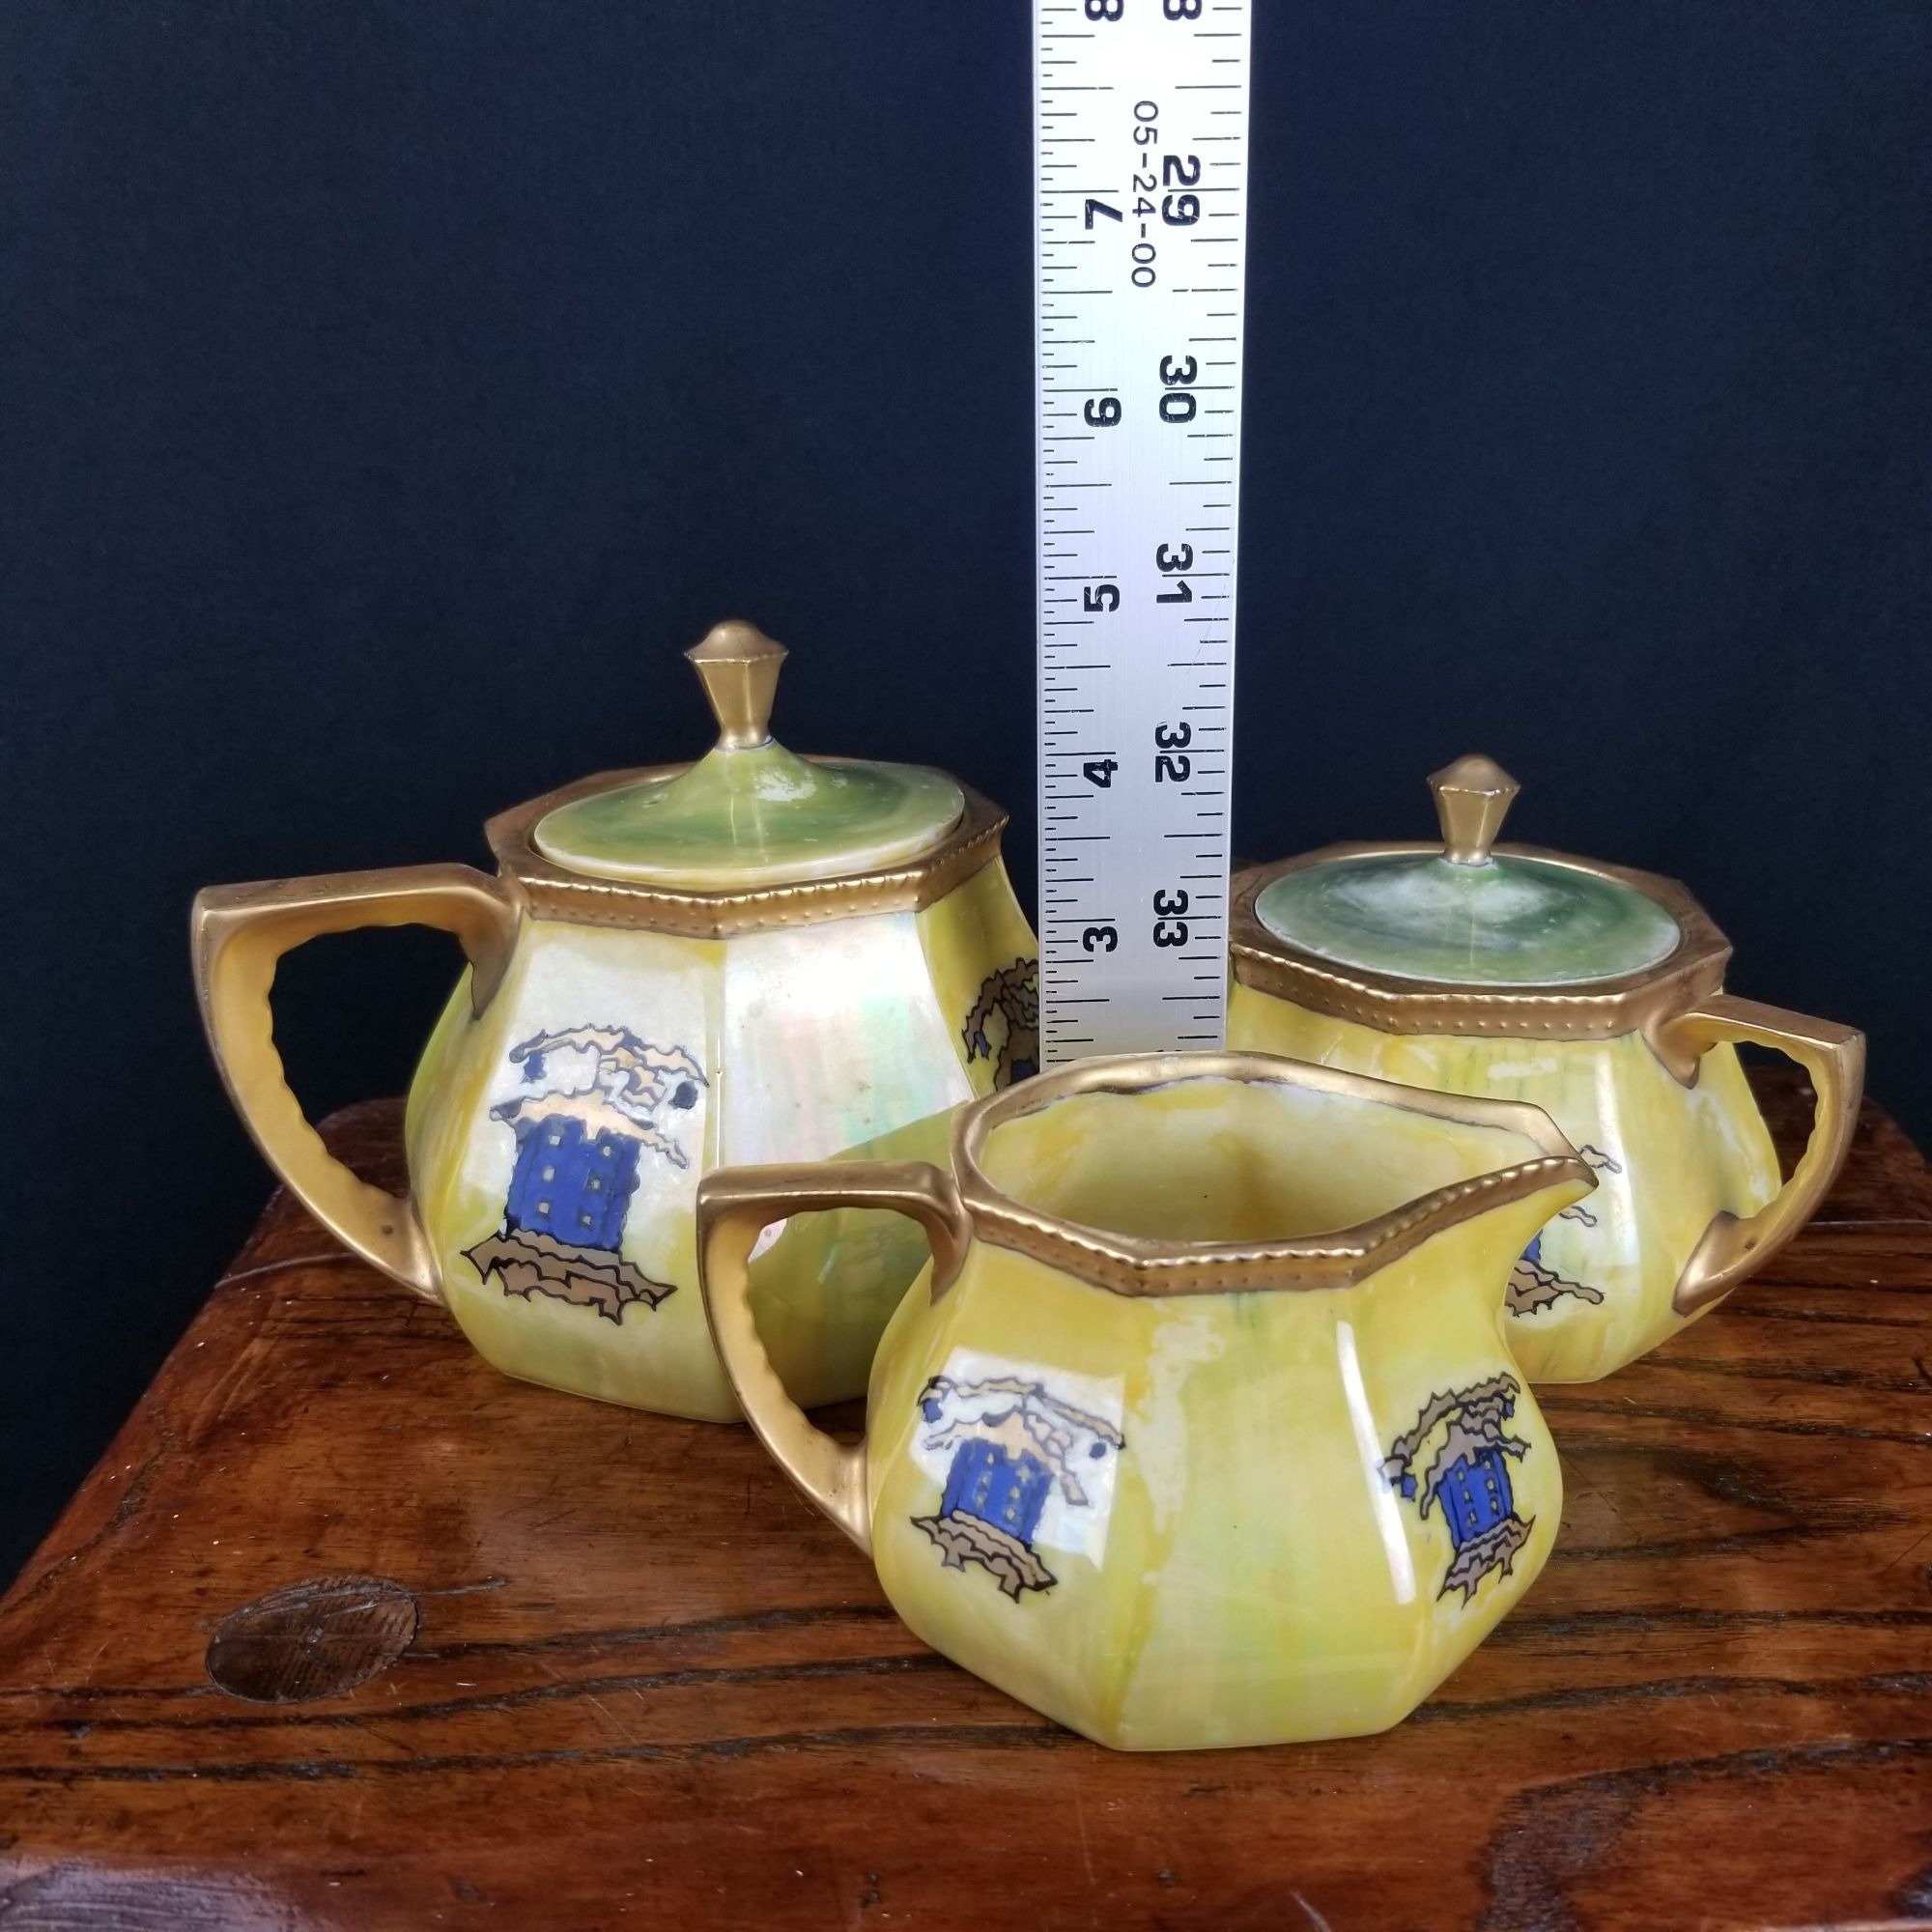 Dezin Electric Kettle and Teapot - Roller Auctions